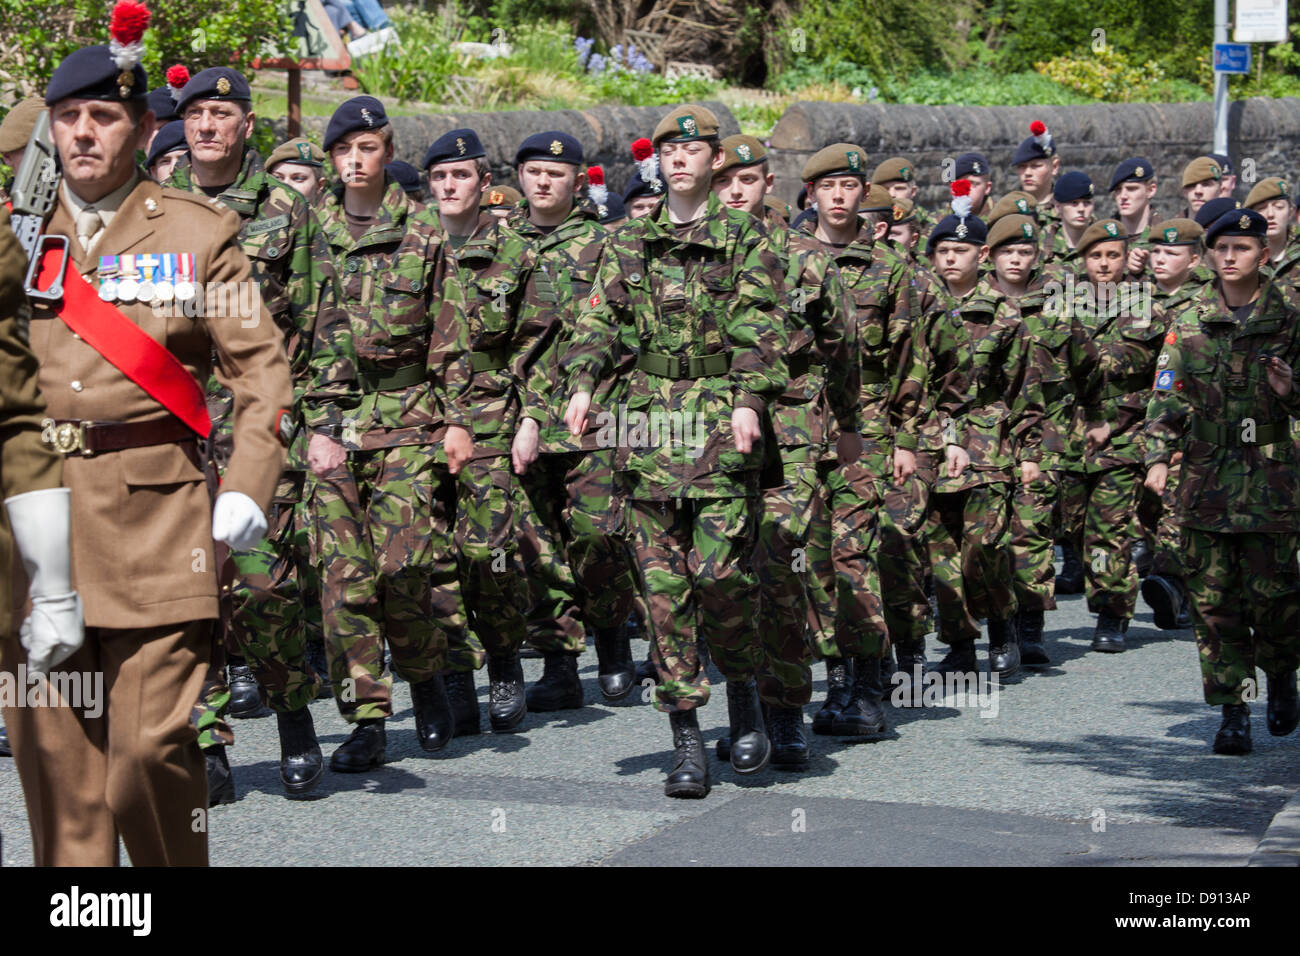 Young army cadets of the Royal Regiment of Fusiliers marching at the Ramsbottom 1940's War Weekend Stock Photo